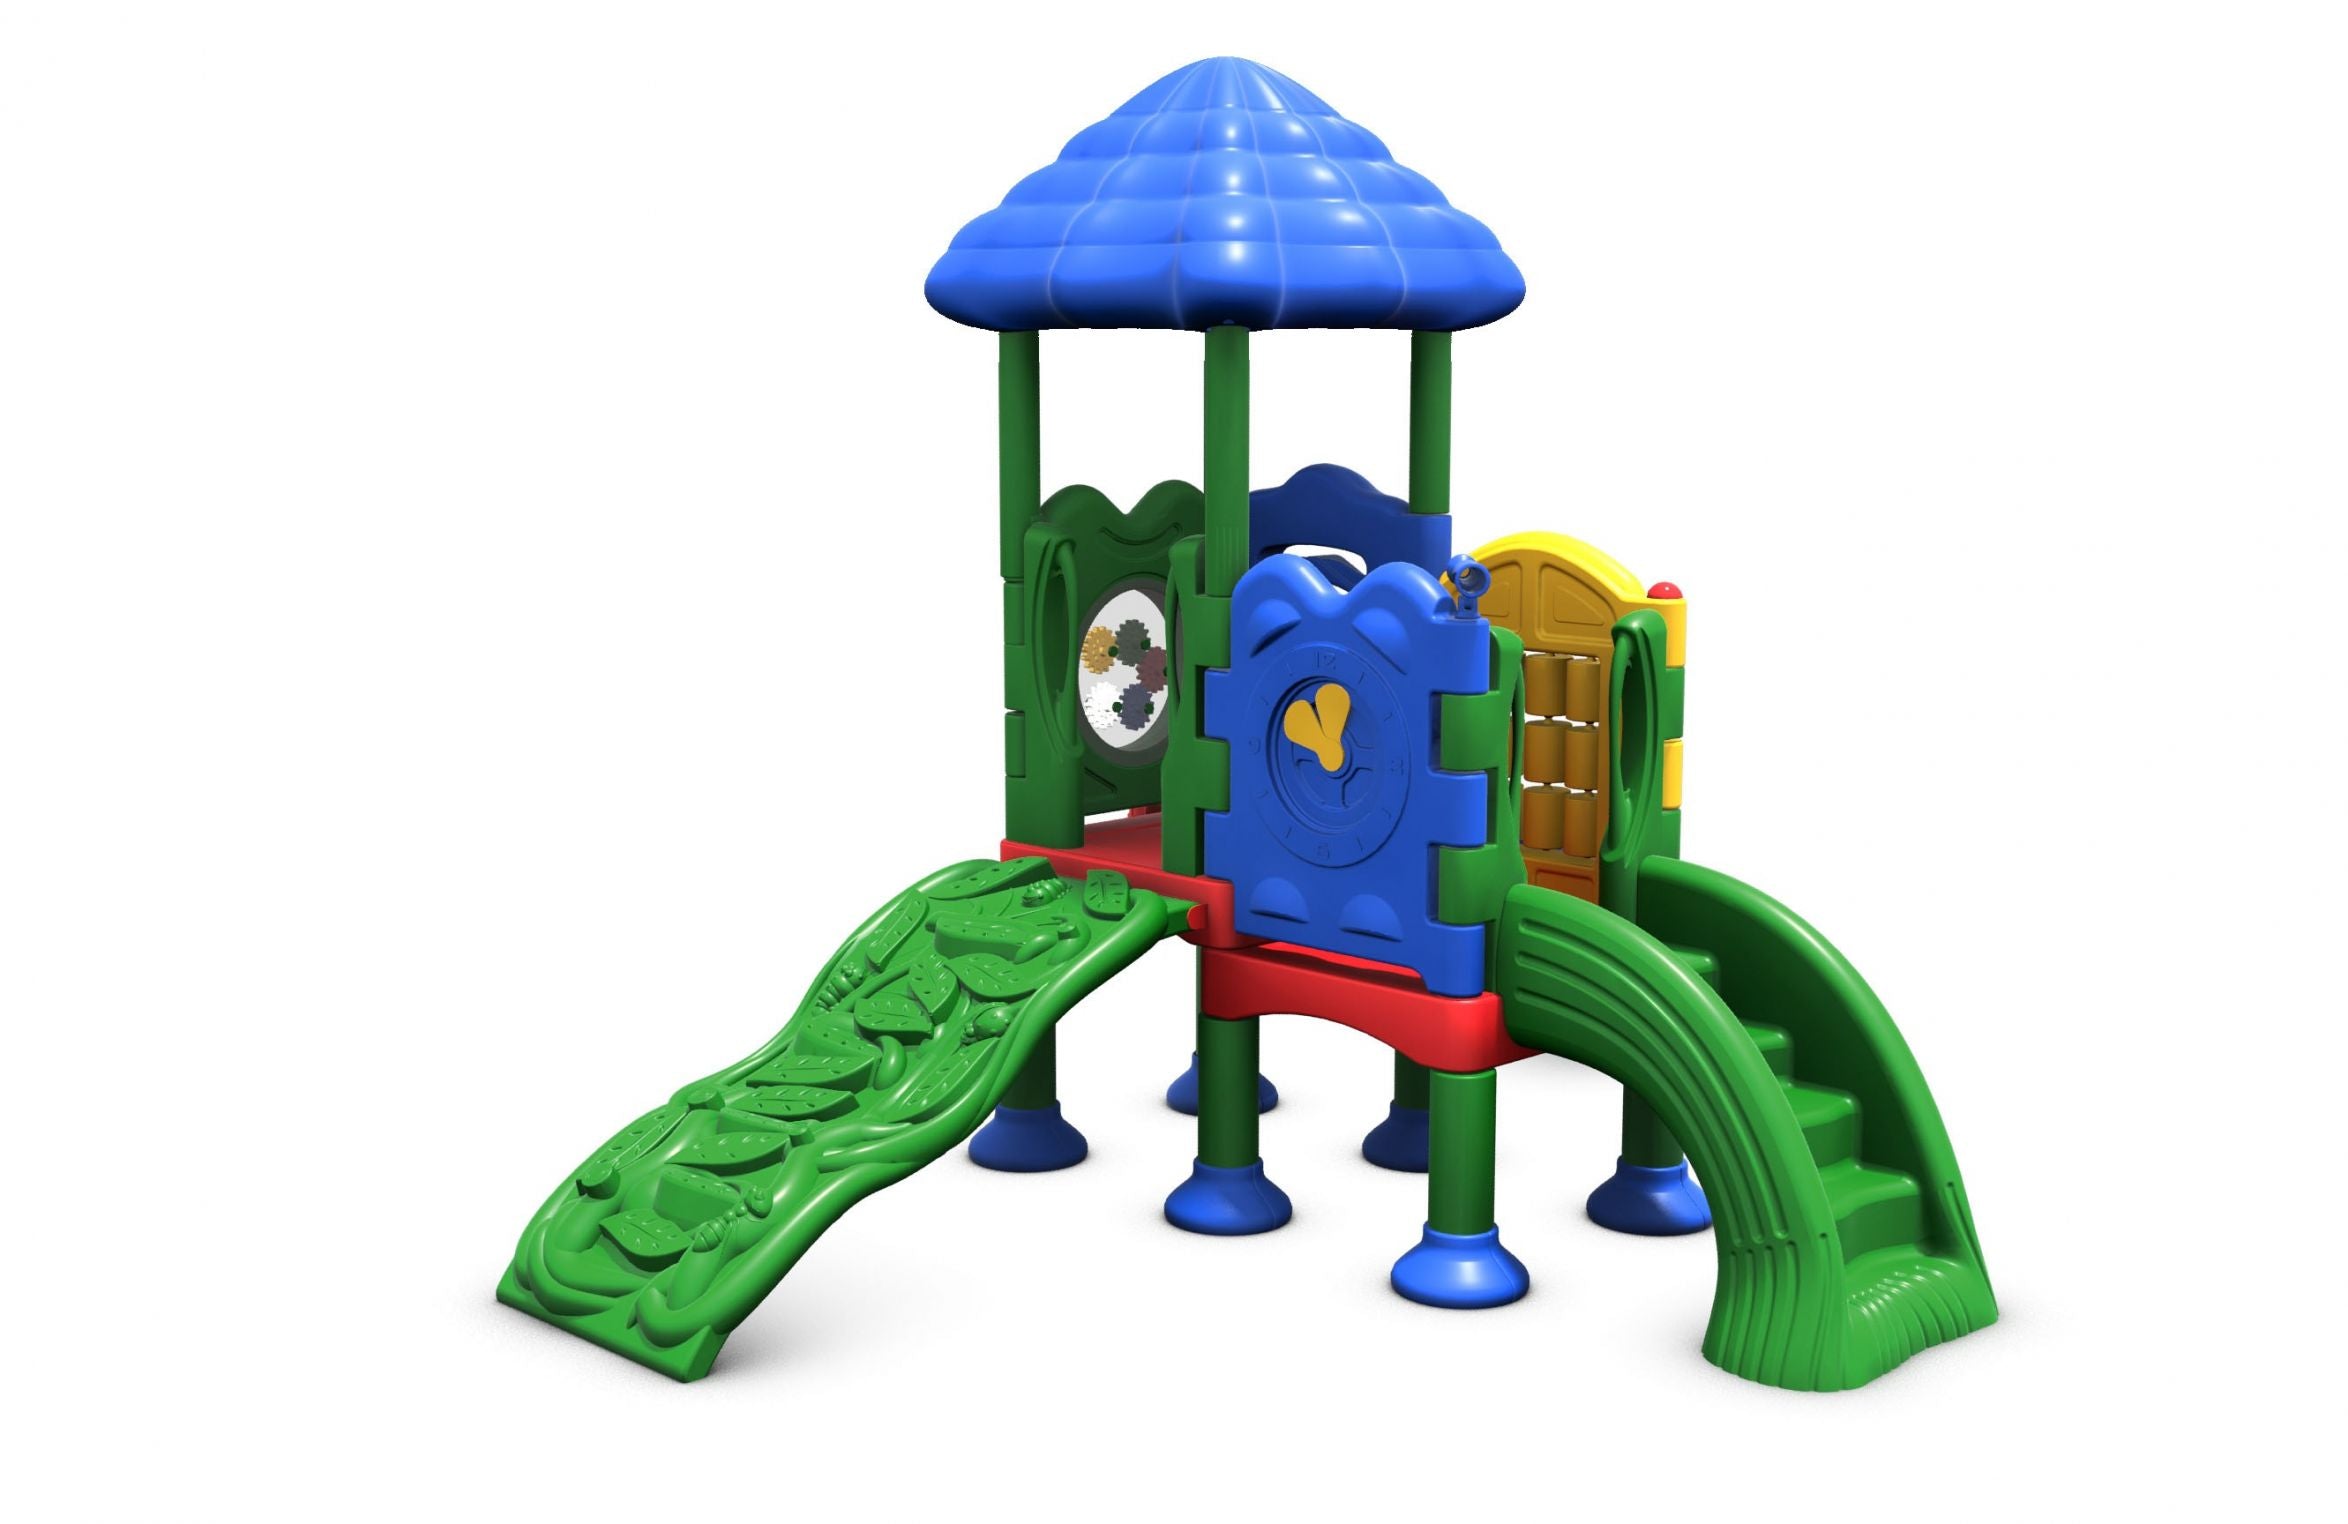 Ridge Learning Centre - Simplified Playgrounds